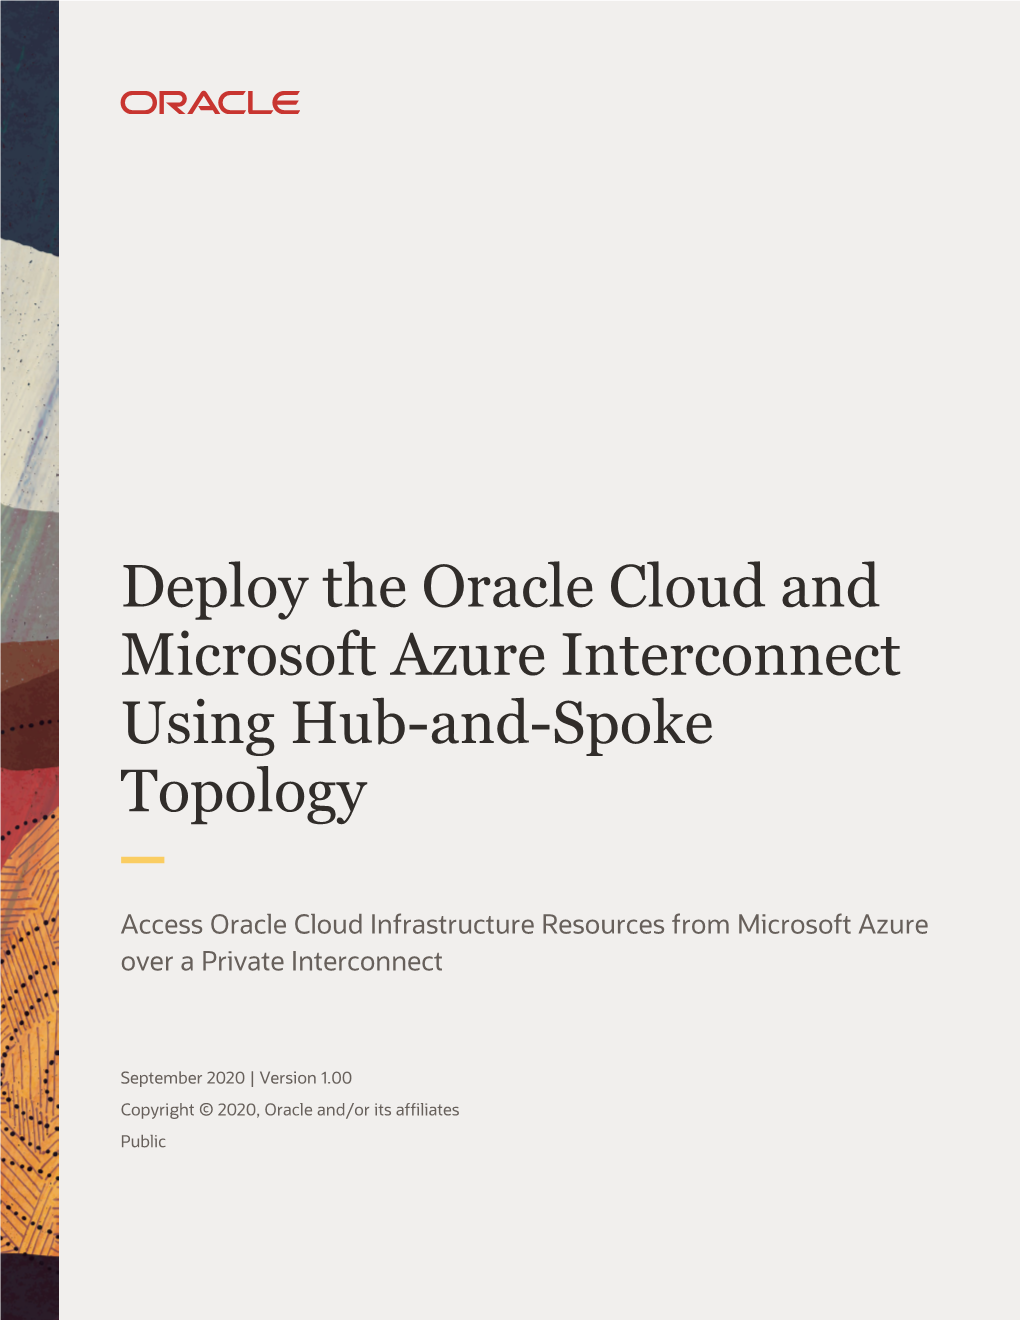 Deploy the Oracle Cloud and Microsoft Azure Interconnect Using Hub-And-Spoke Topology